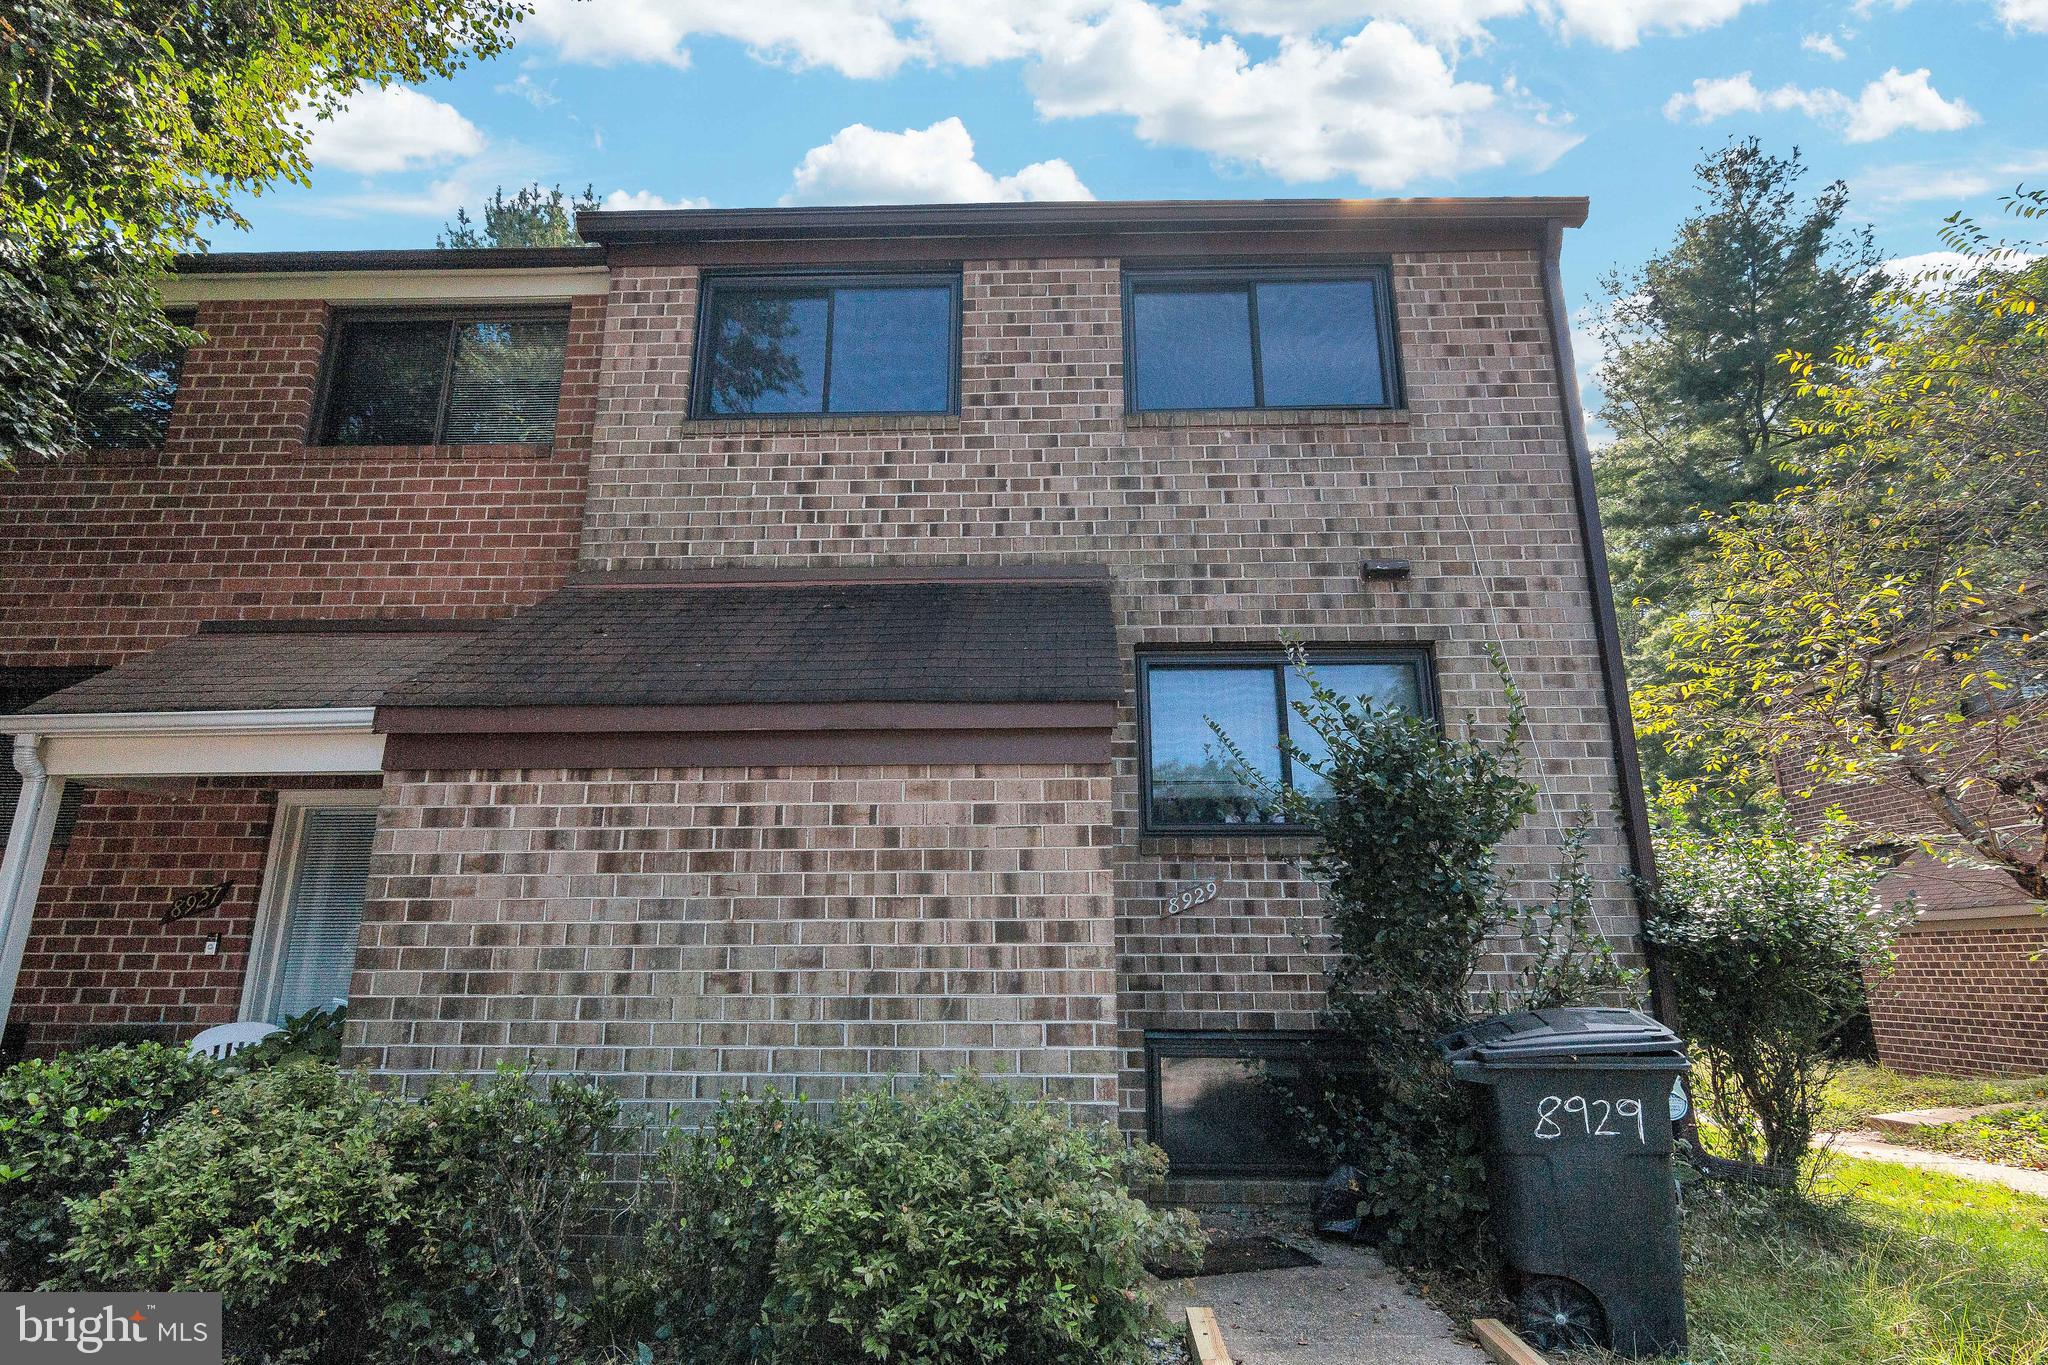 Welcome to Kings Contrivance in Columbia, Maryland. This beautiful brick-end unit townhouse has 4 be